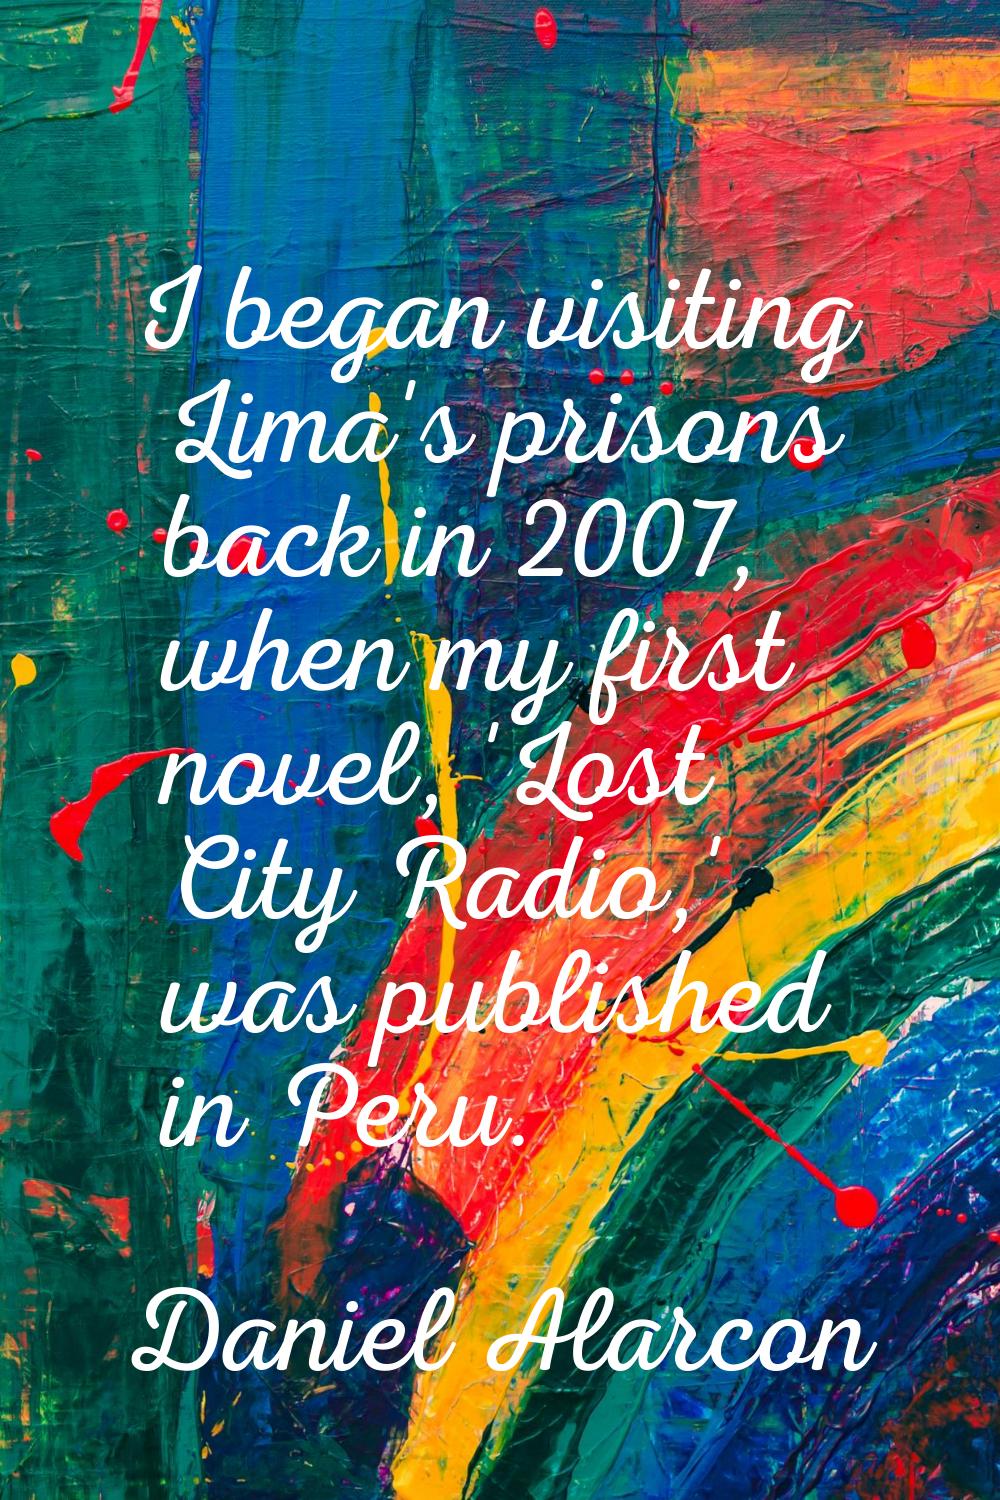 I began visiting Lima's prisons back in 2007, when my first novel, 'Lost City Radio,' was published